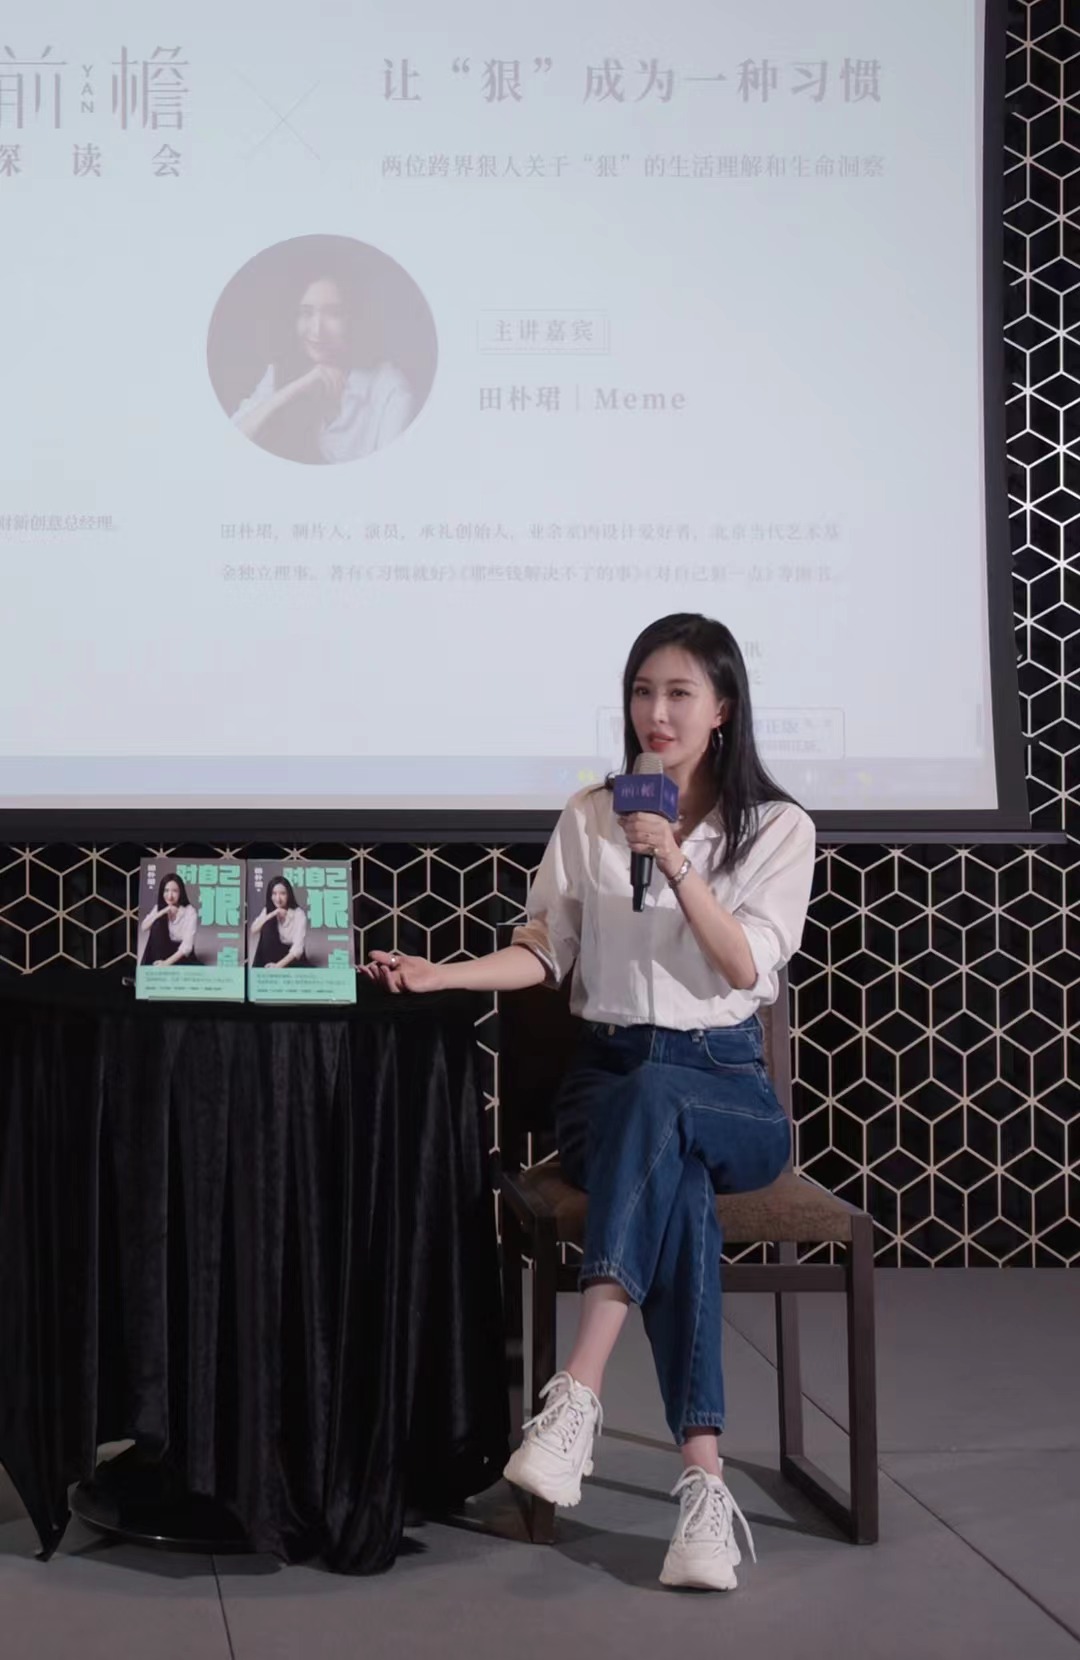 Tian Pujun shared experience with 10,000 women face-to-face, and a new book sharing meeting was held across the country